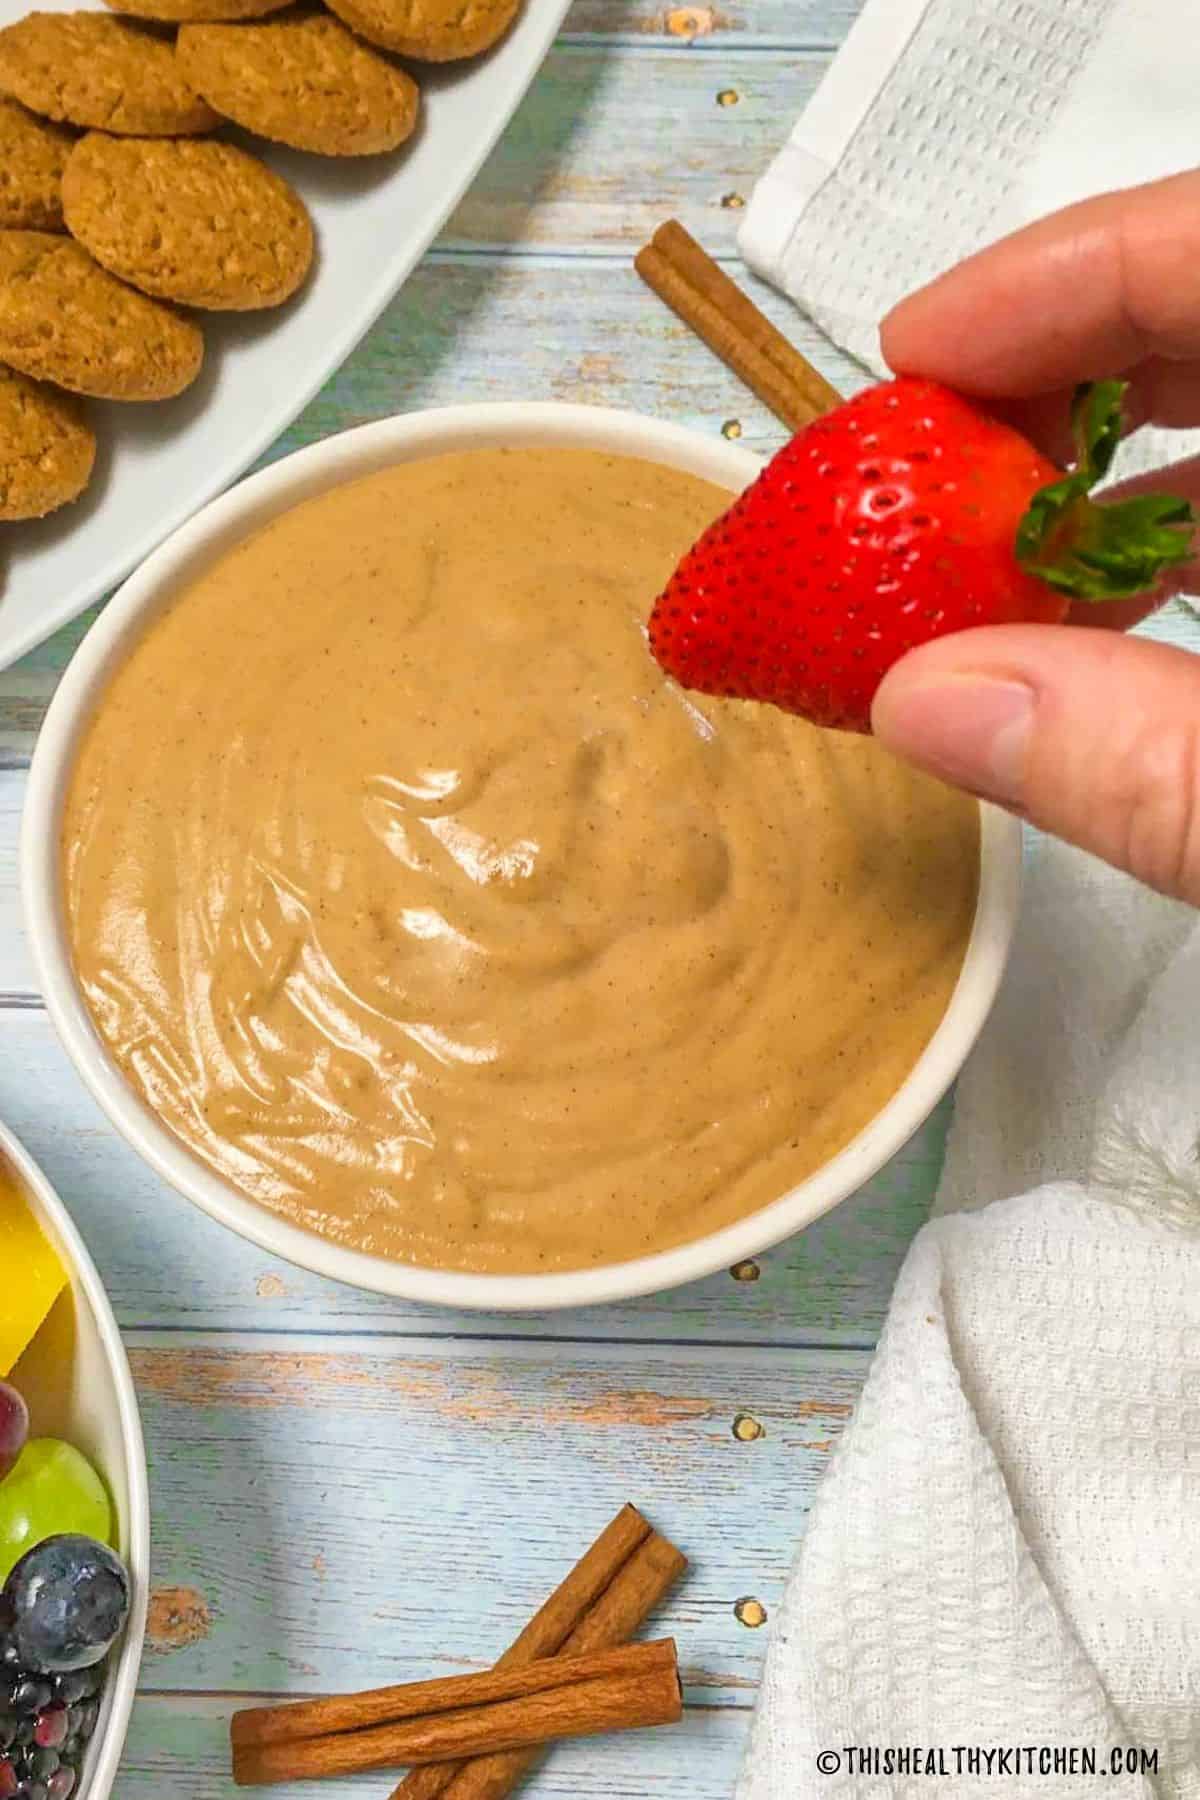 Hand holding strawberry over bowl of dip.